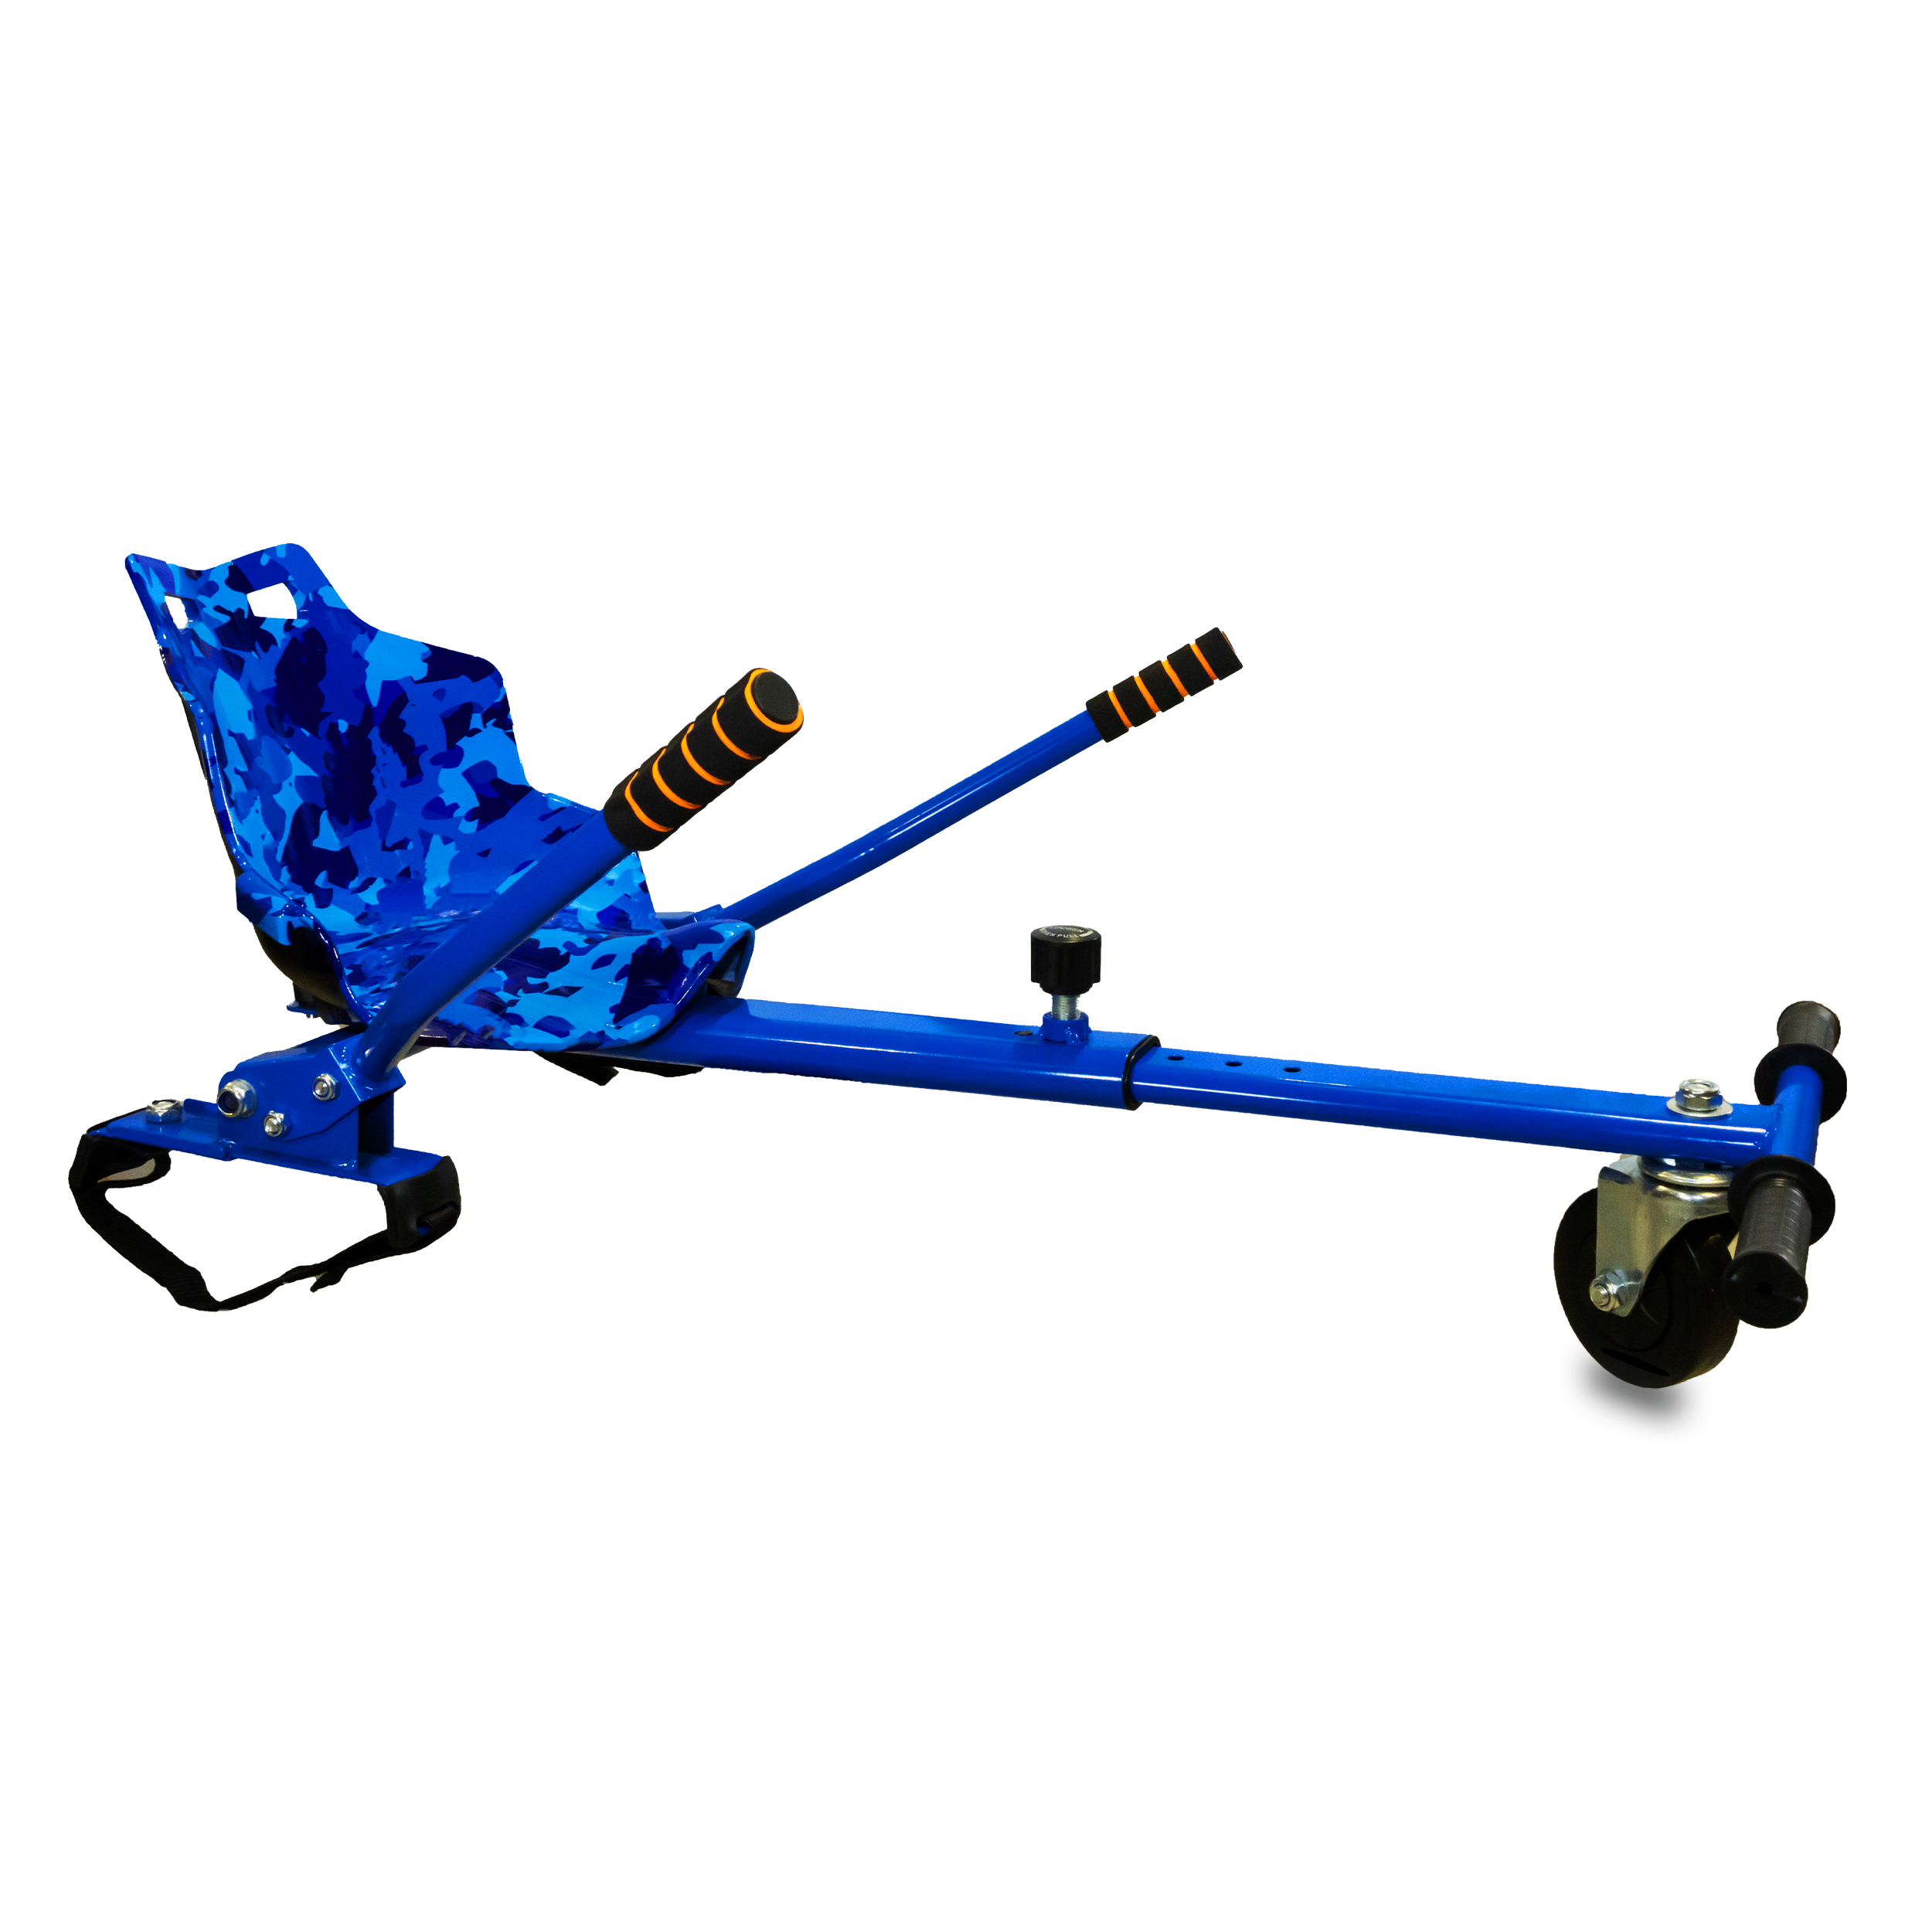 Blue hoverkart equipped with camouflage design seat, adjustable metal frame, and black wheels.